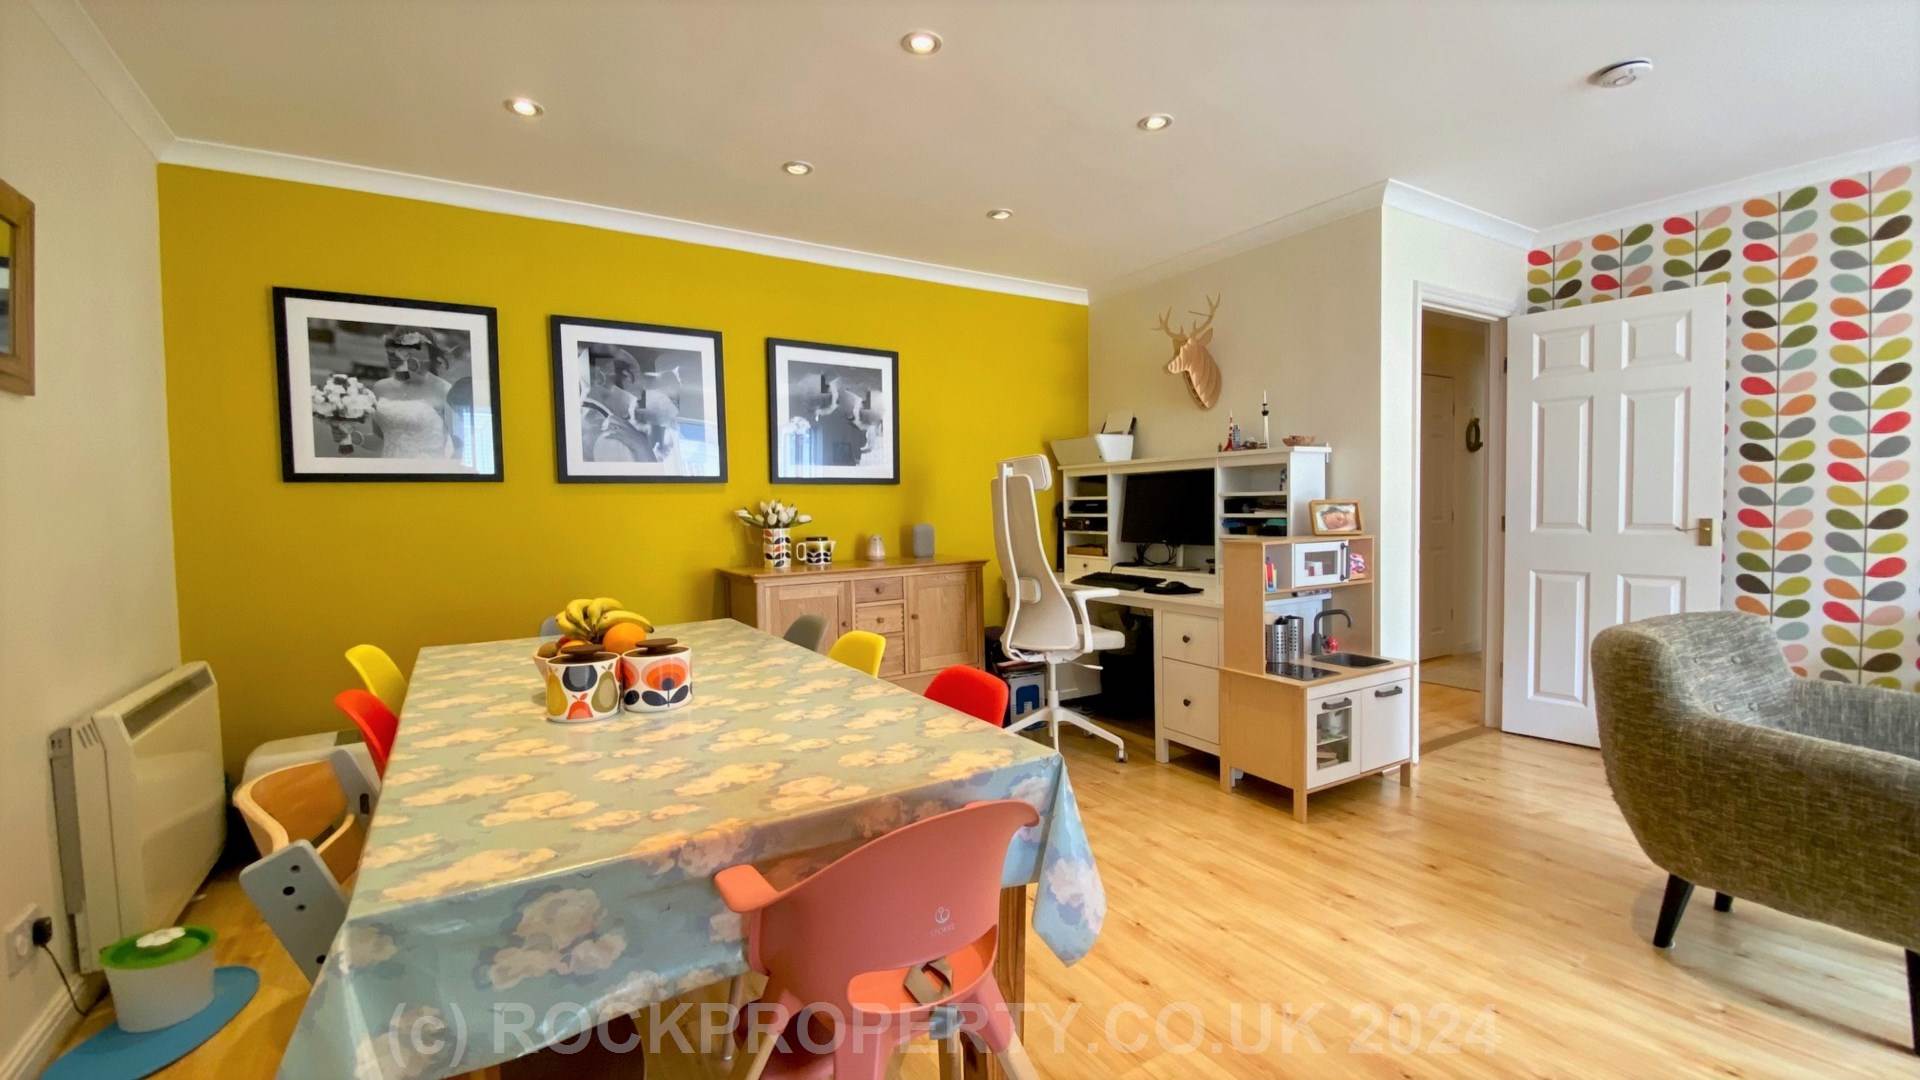 SPACIOUS 2 BED + BALCONY, Woodville Apartments, St Saviour's Road, Image 4